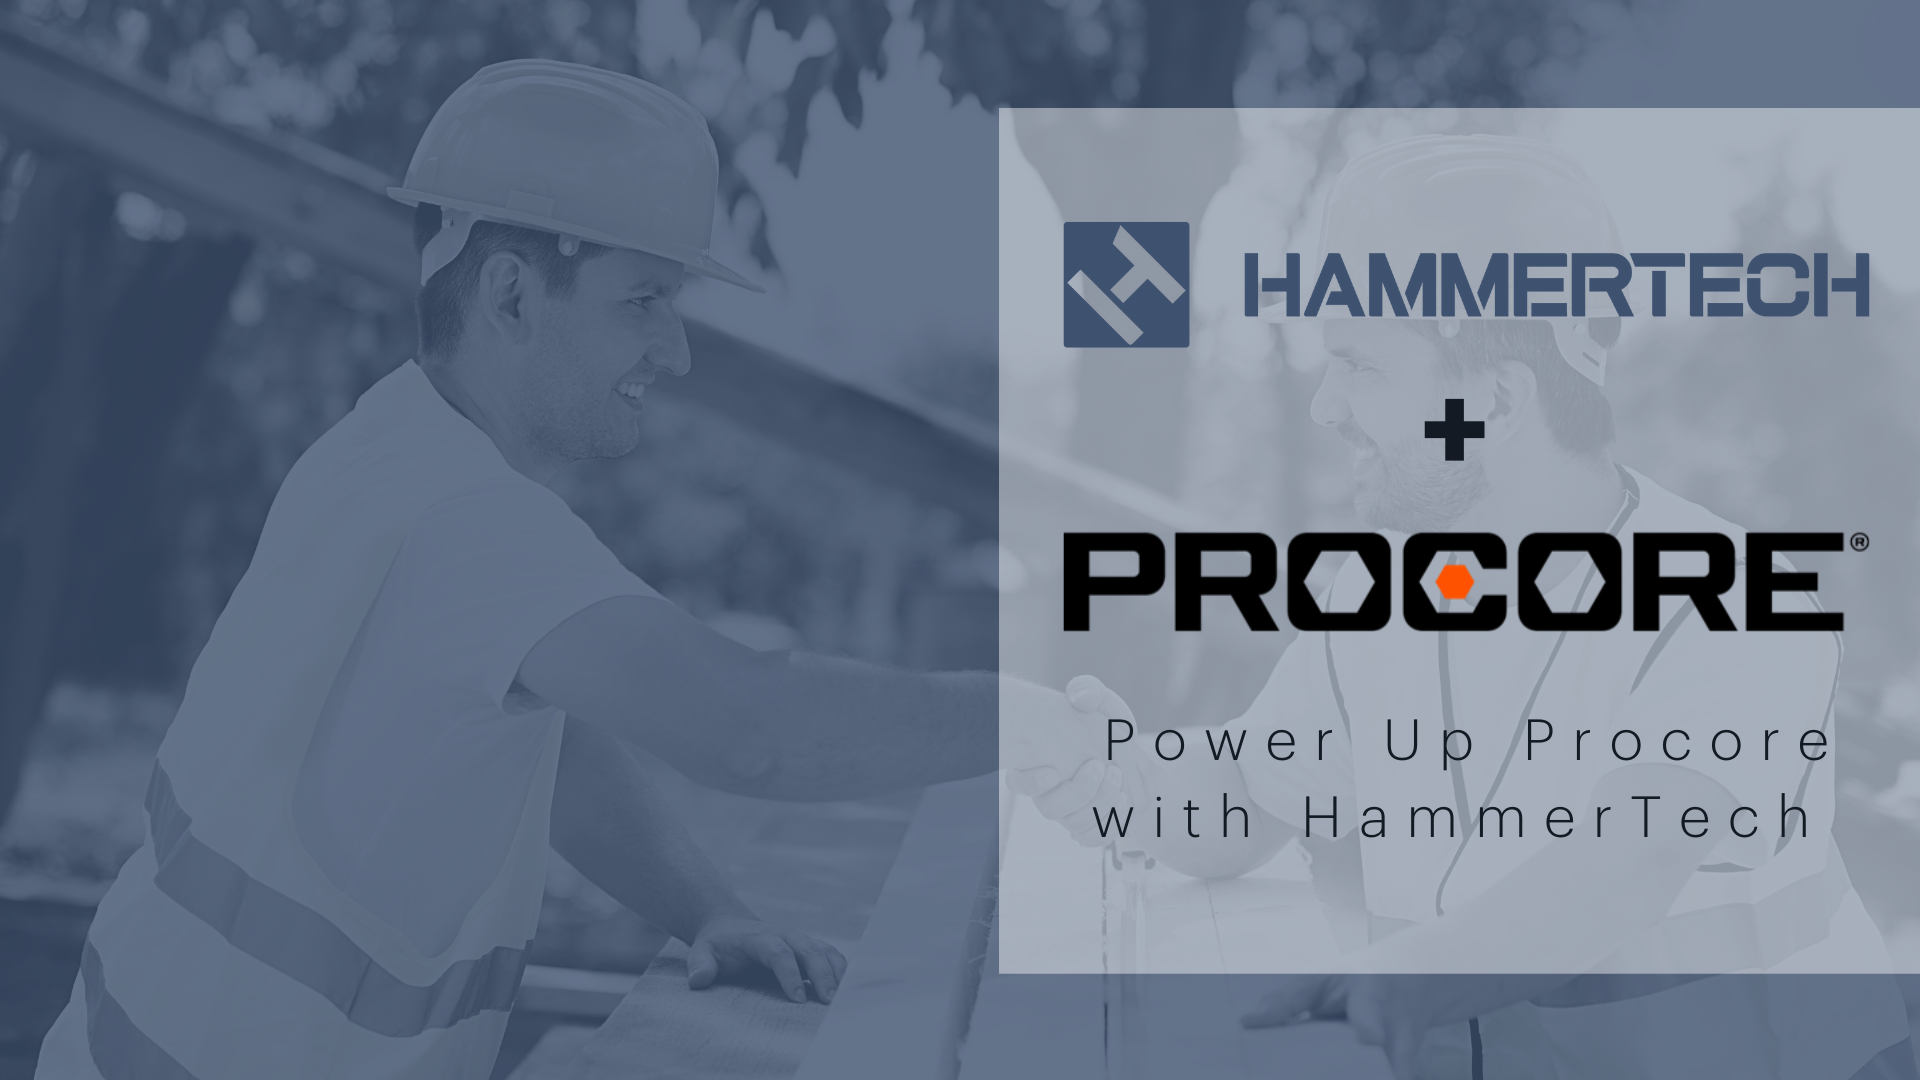 HammerTech Announces Integration with Procore to Provide Connected Safety and Operations